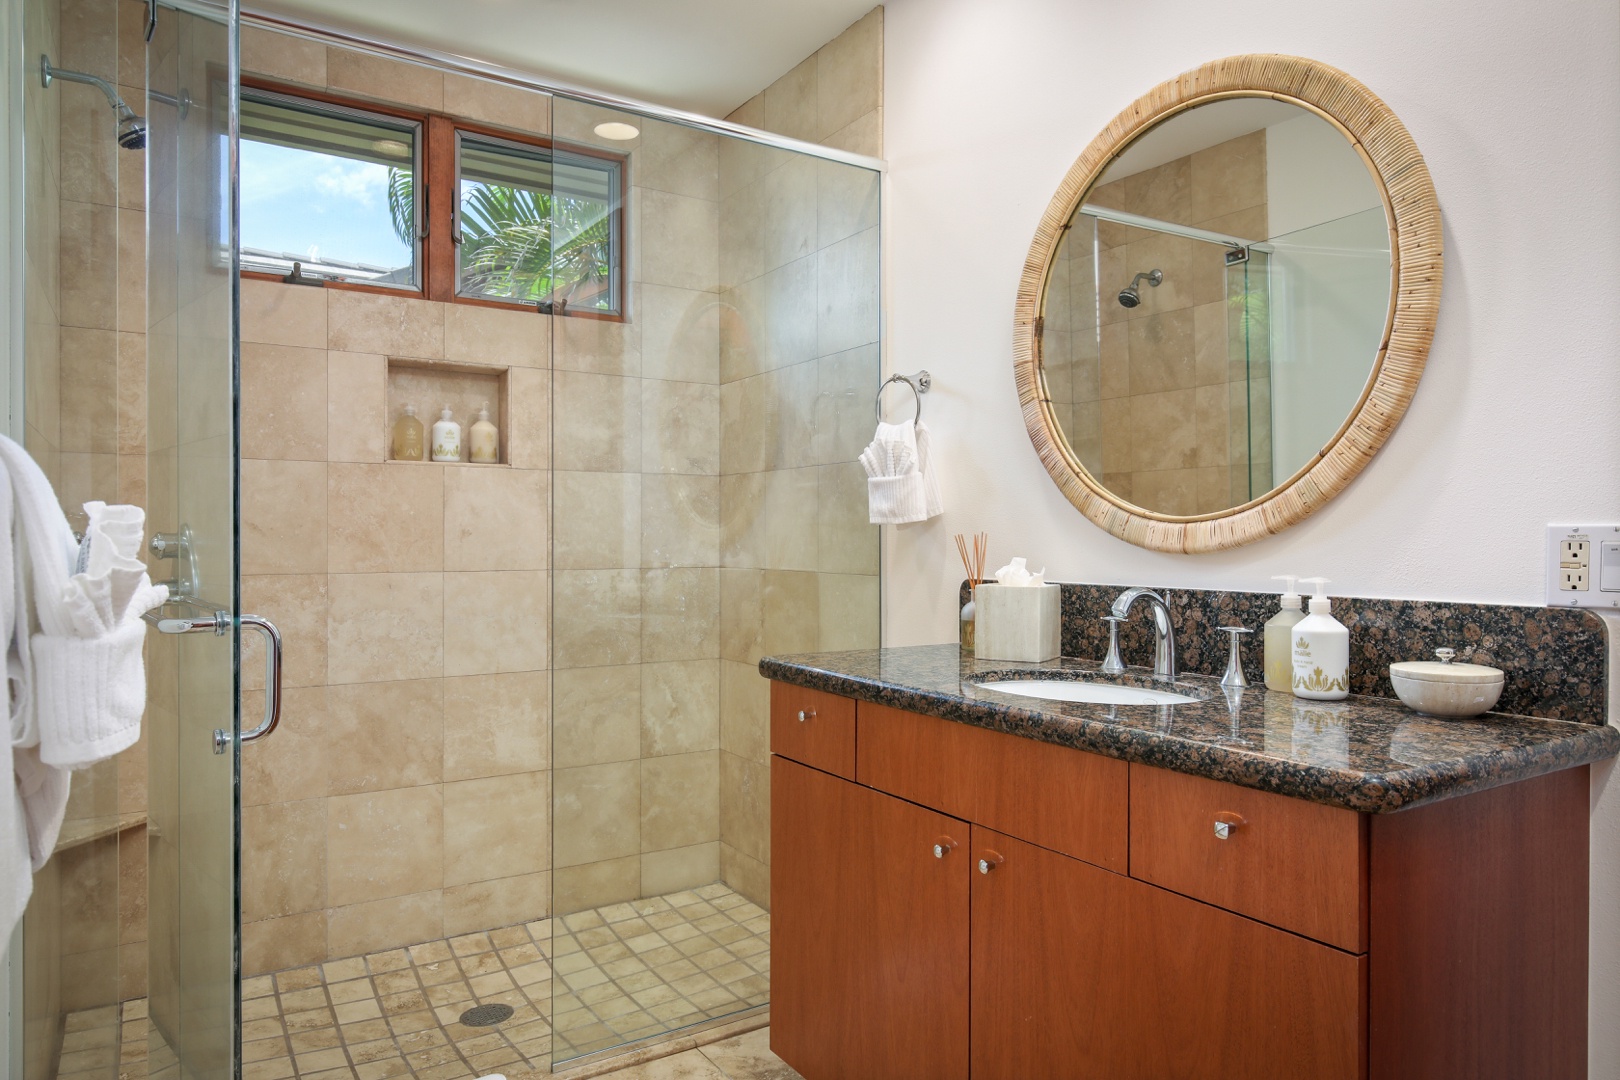 Kailua Kona Vacation Rentals, 4BD Pakui Street (147) Estate Home at Four Seasons Resort at Hualalai - Guest Suite #1’s dedicated full bath with large glass enclosed shower.